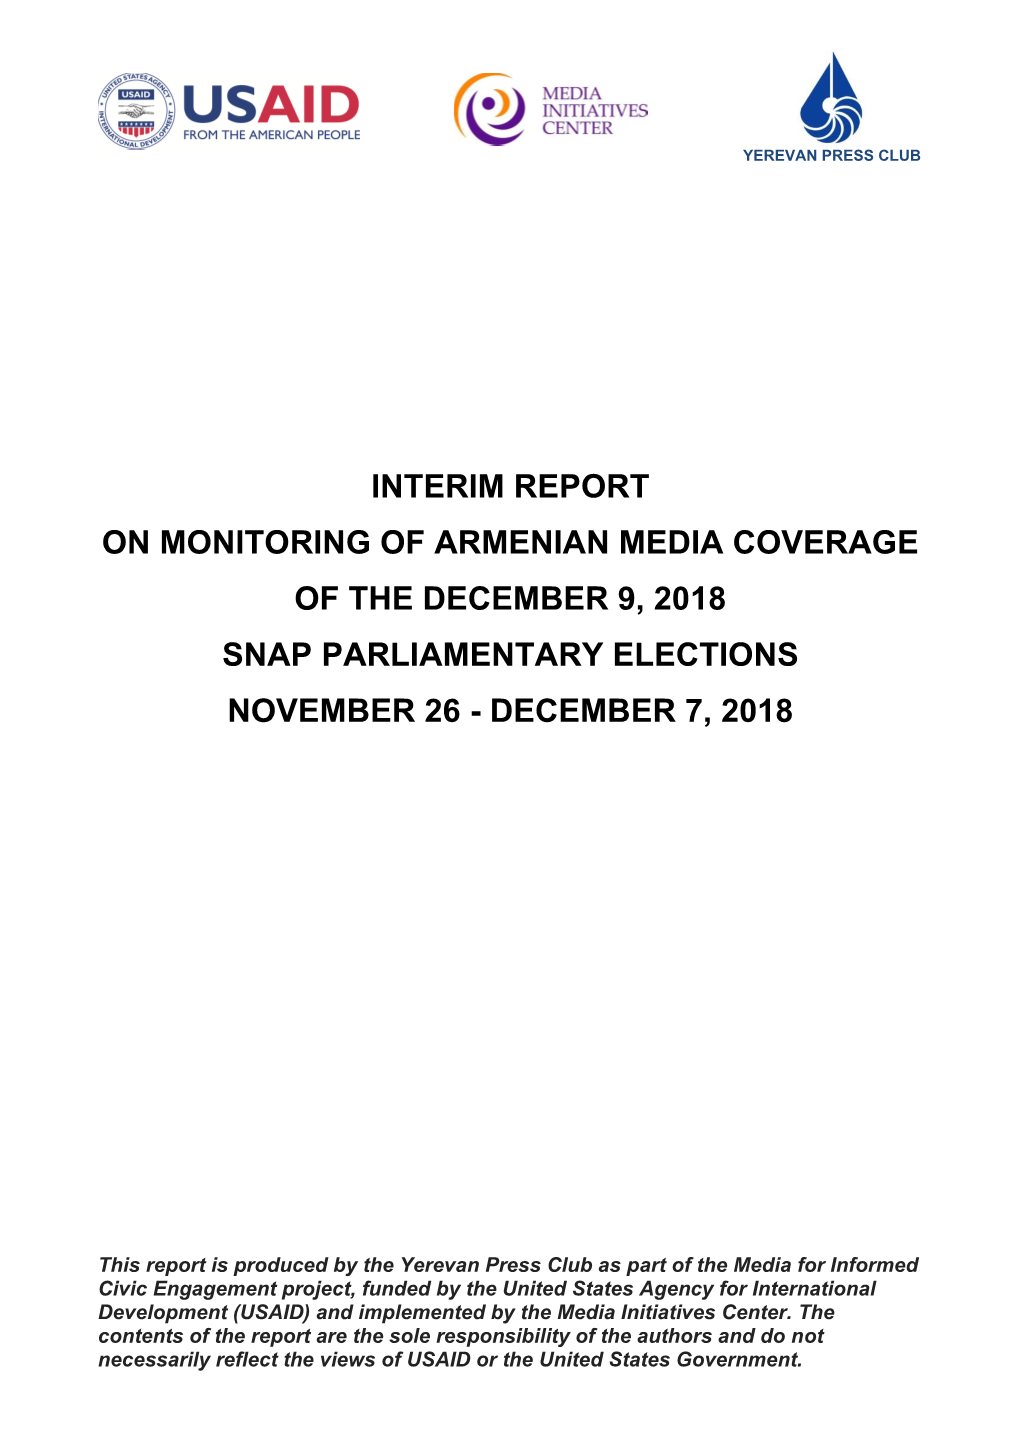 Interim Report on Monitoring of Armenian Media Coverage of the December 9, 2018 Snap Parliamentary Elections November 26 - December 7, 2018